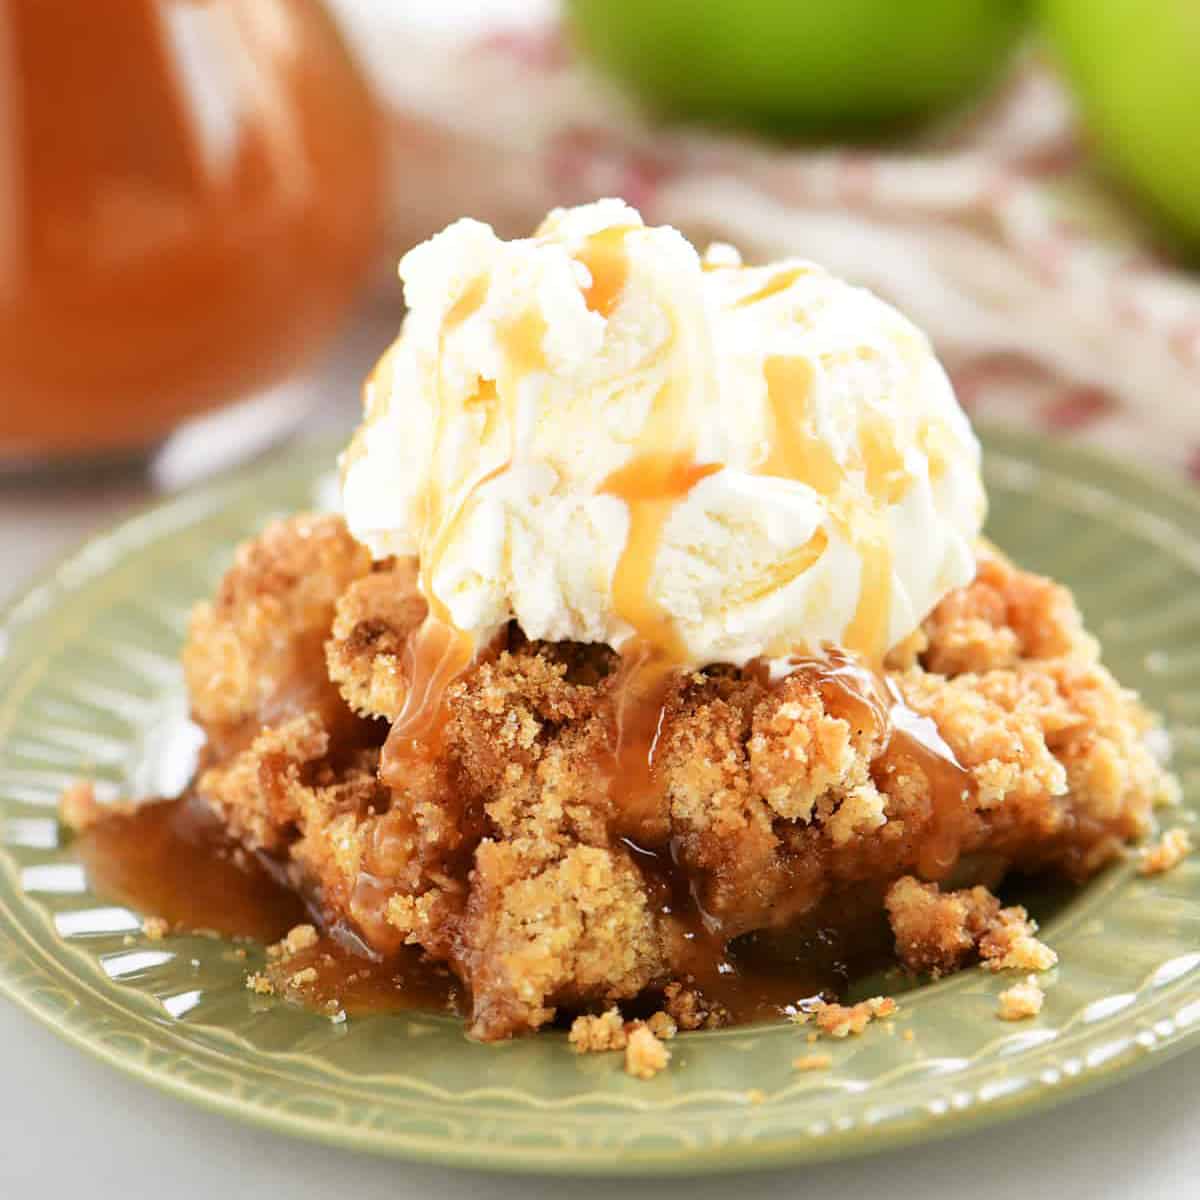 apple crumble with ice cream on top.